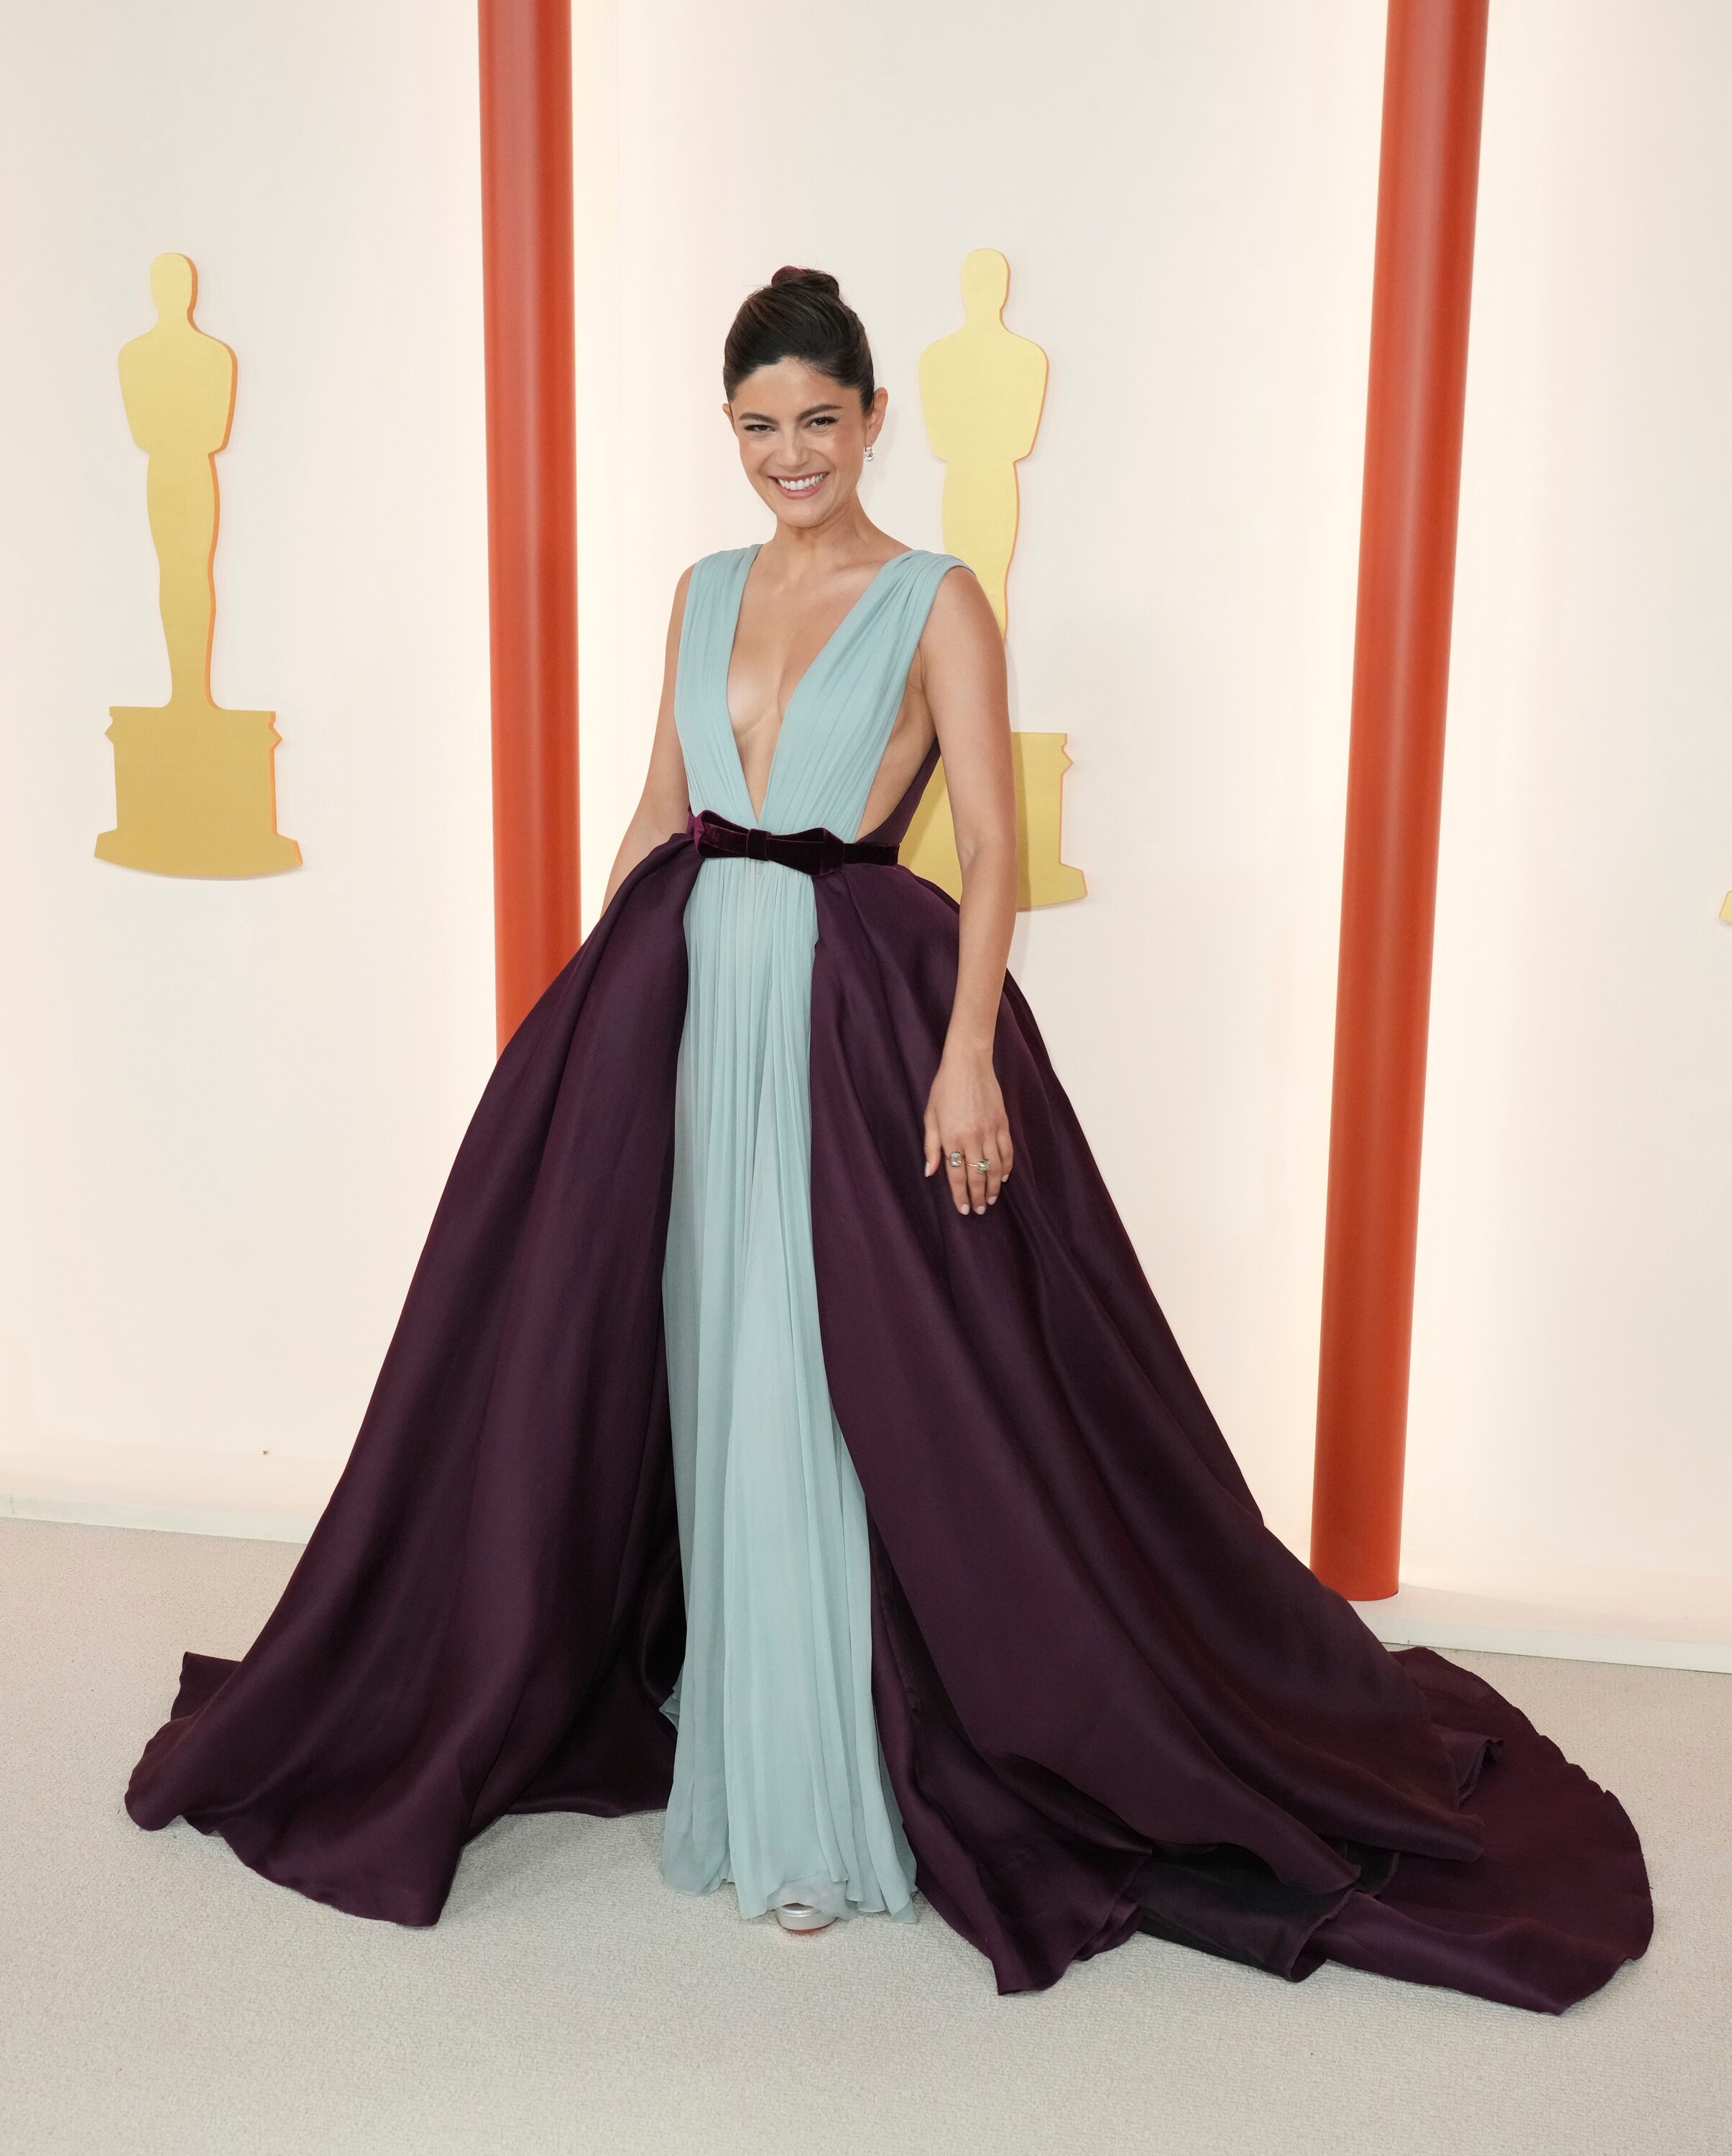 Monica Barbaro wearing a pale blue floor-length dress with a dark purple flowy skirt over the top